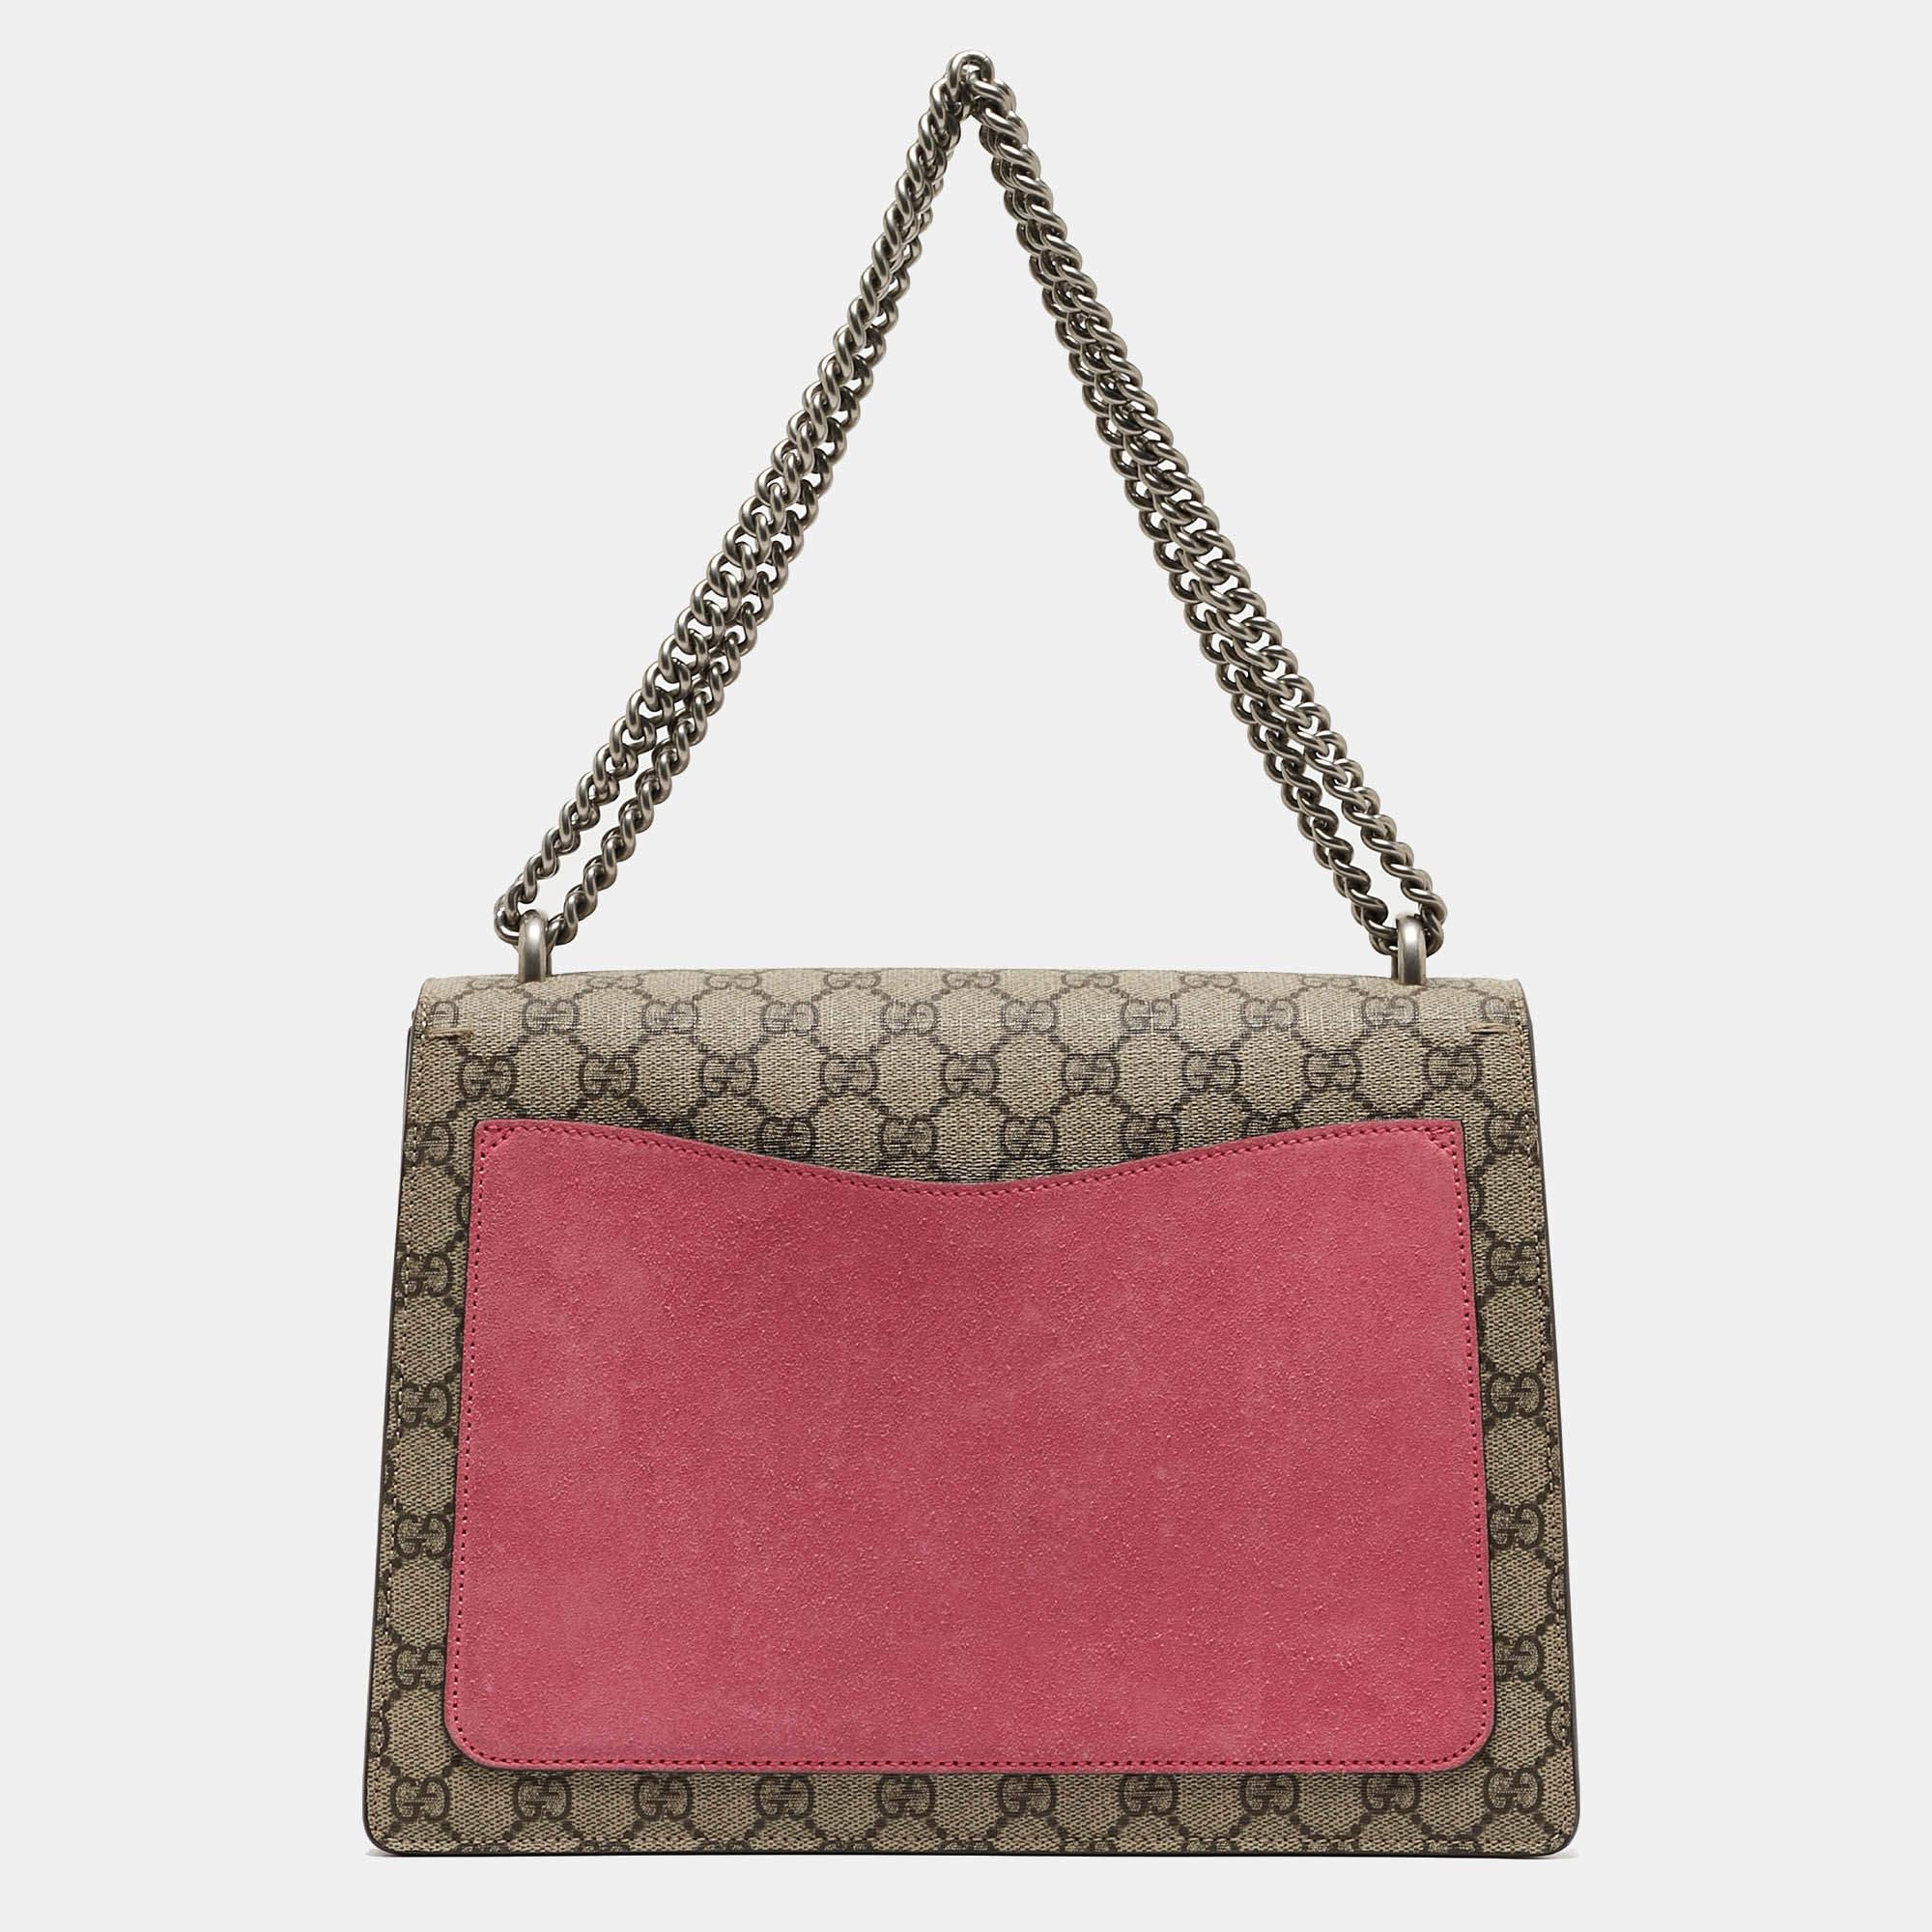 The fashion house’s tradition of excellence, coupled with modern design sensibilities, works to make this Gucci bag one of a kind. It's a fabulous accessory for everyday use.

